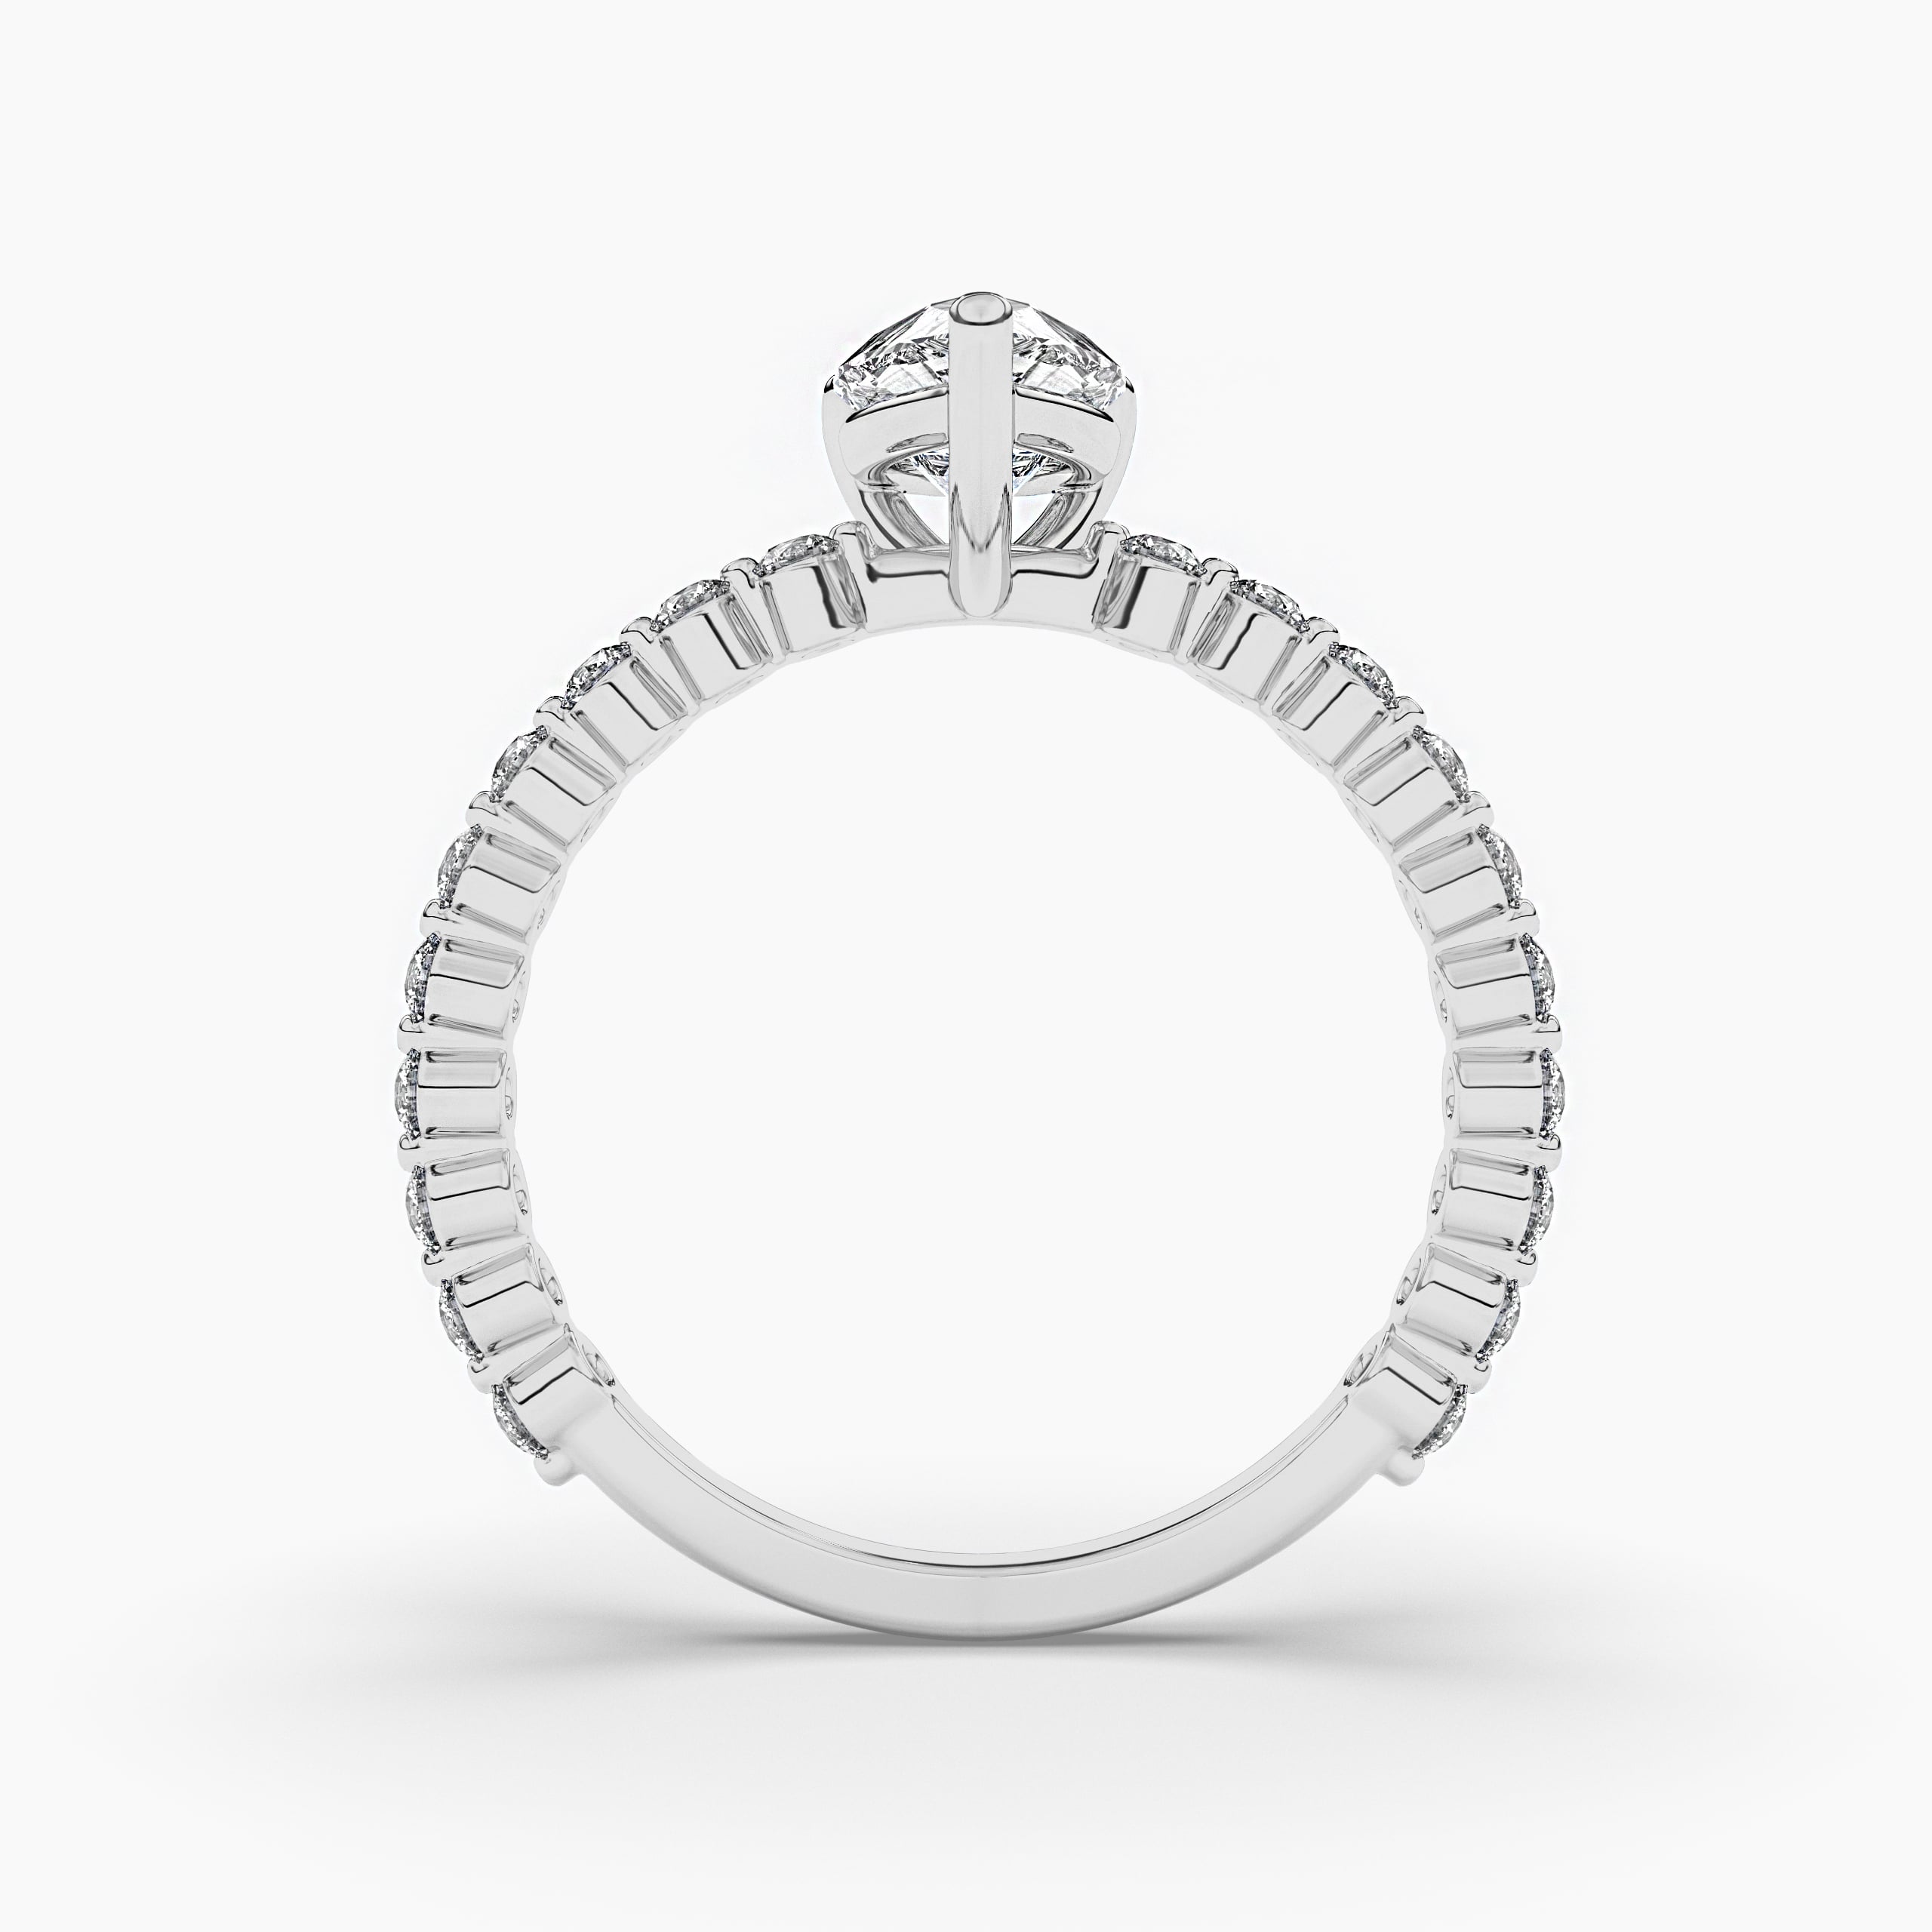  SIDE STONE ENGAGEMENT RING WITH PEAR-SHAPED IN WHITE GOLD